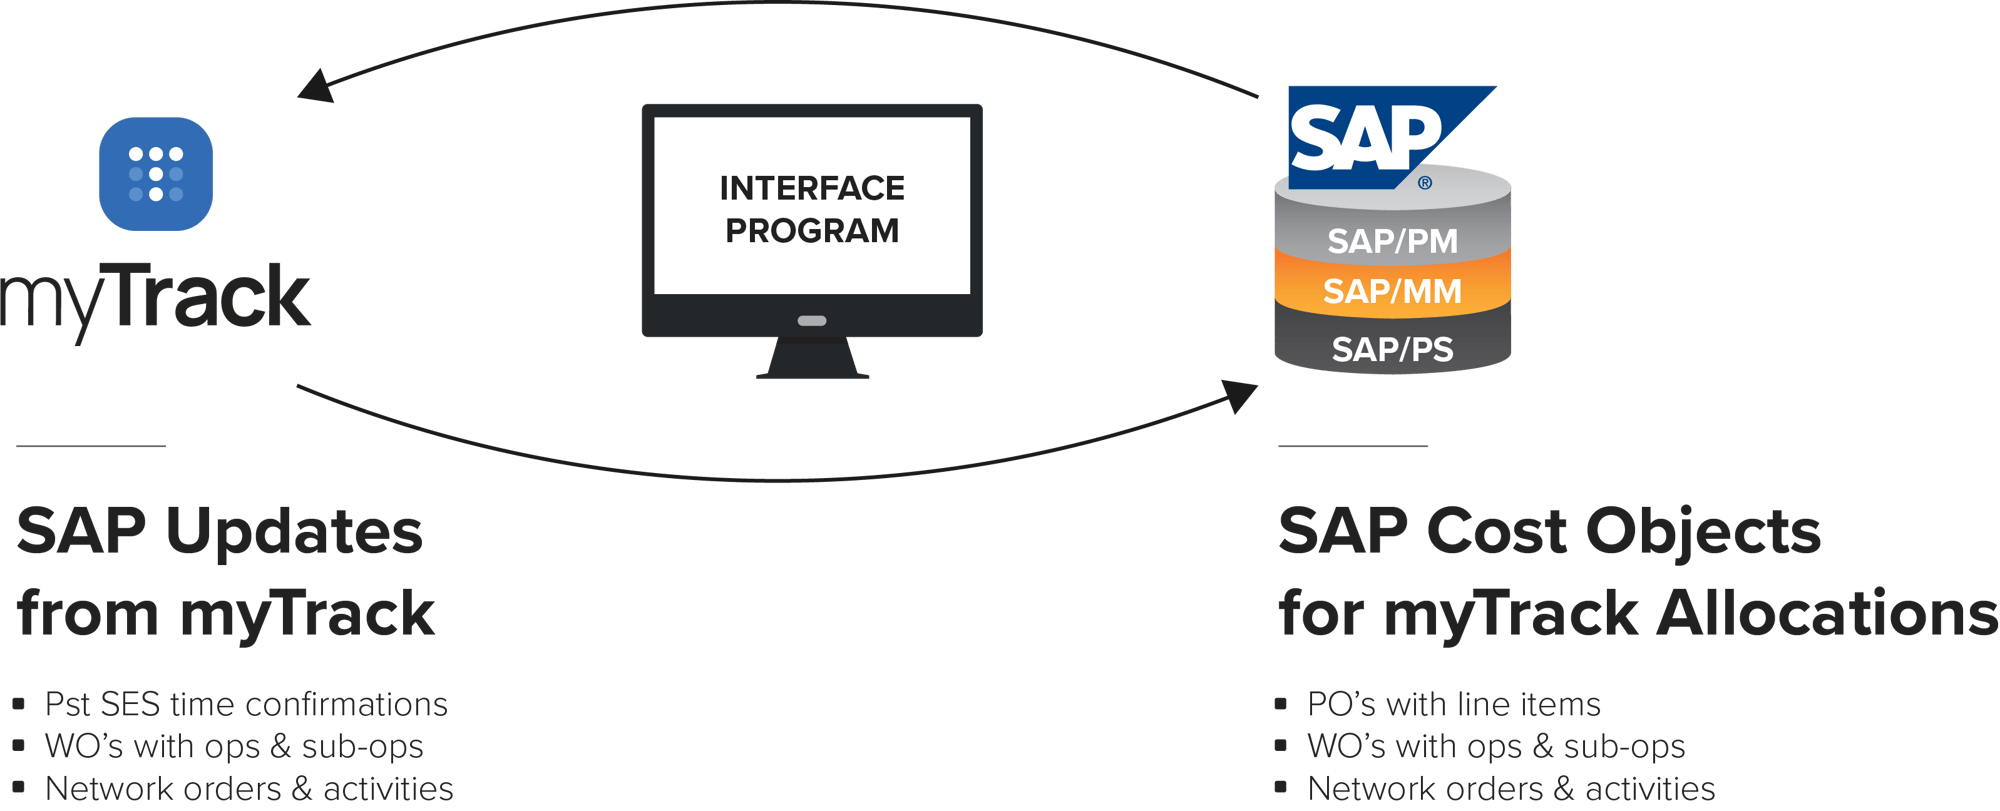 myTrack System and SAP Cost Objects Infograph